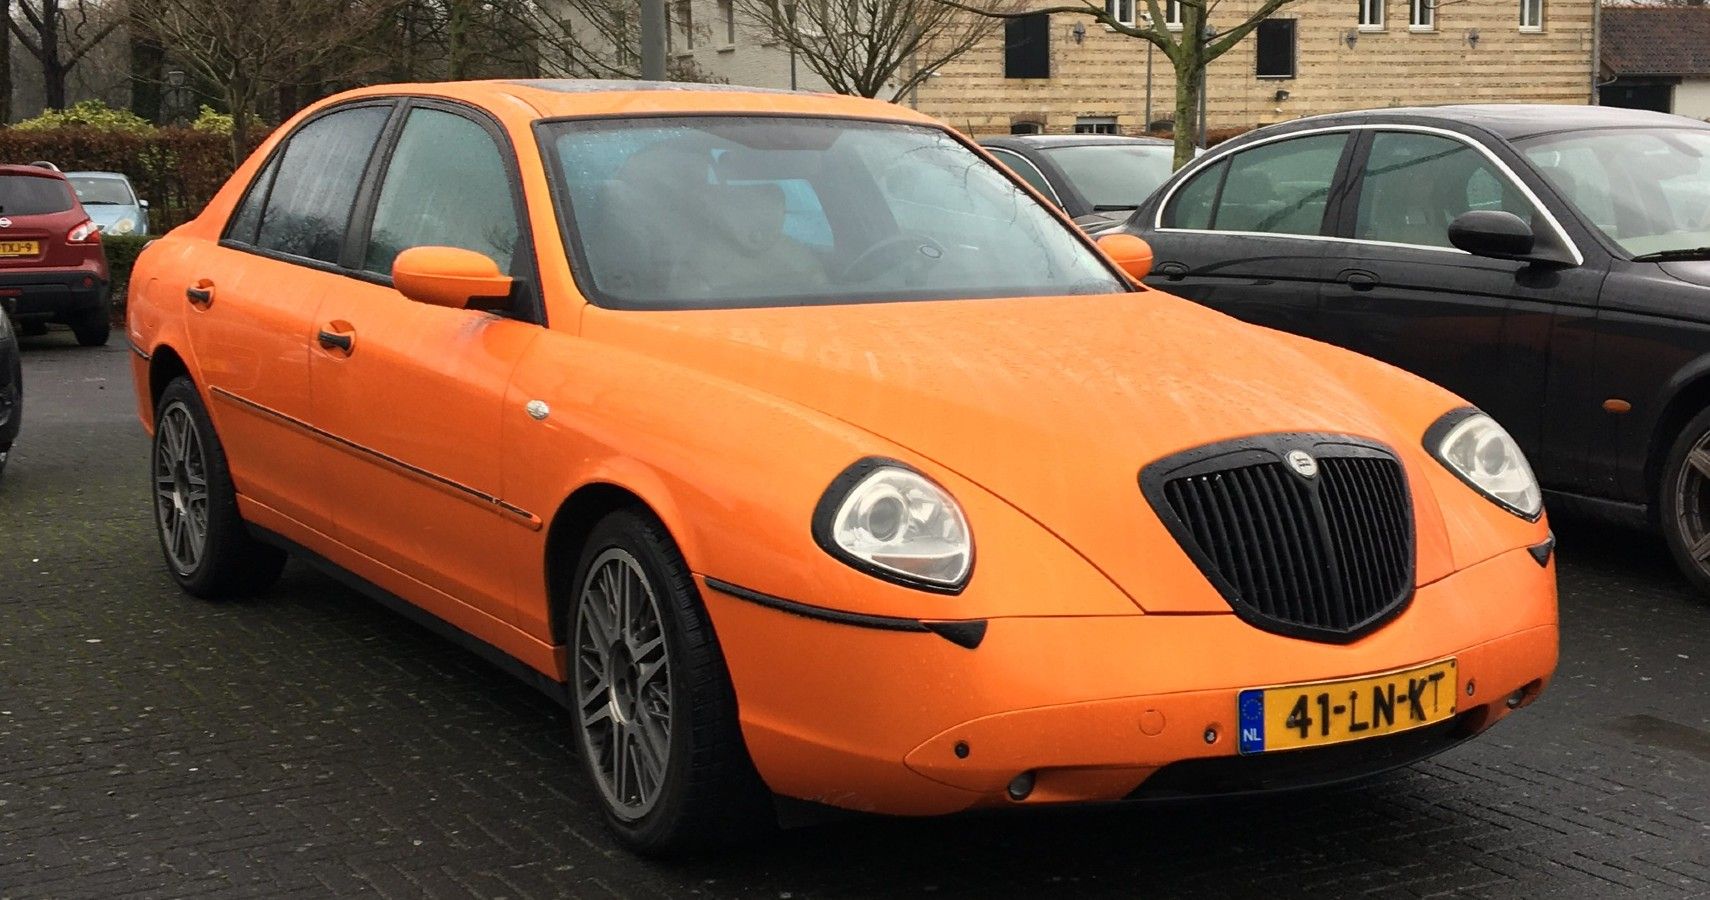 Nobody Wants To Be Associated With These Italian Luxury Cars